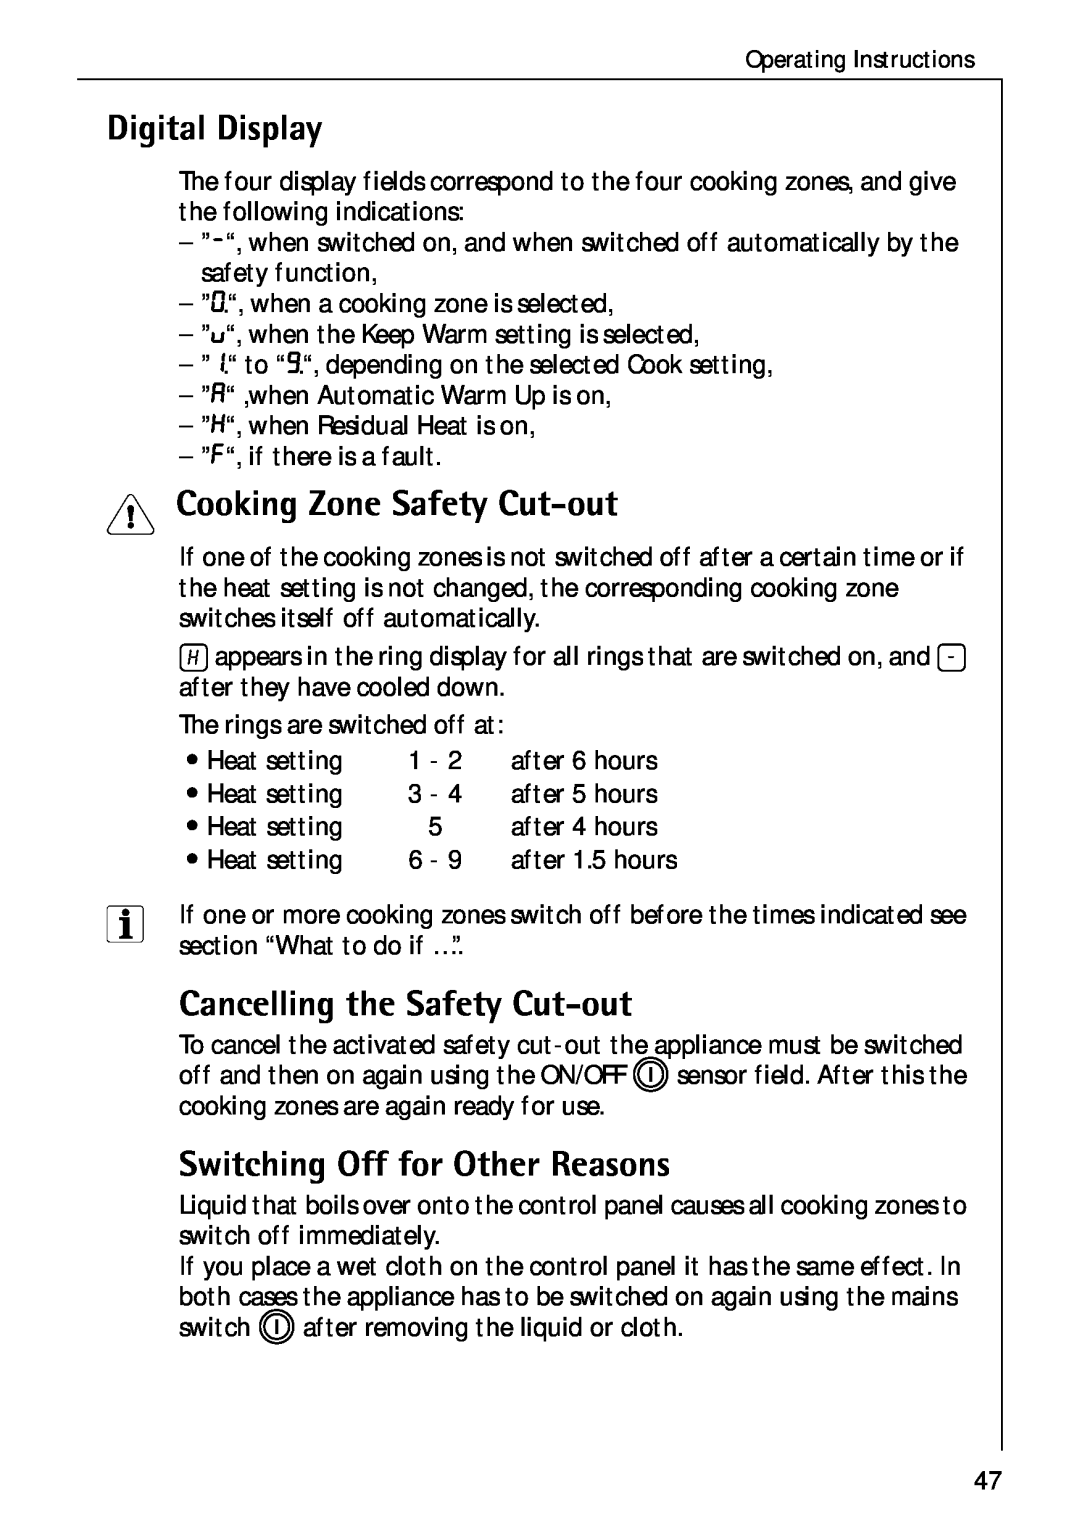 Electrolux C75301K operating instructions Digital Display, Cooking Zone Safety Cut-out, Cancelling the Safety Cut-out 